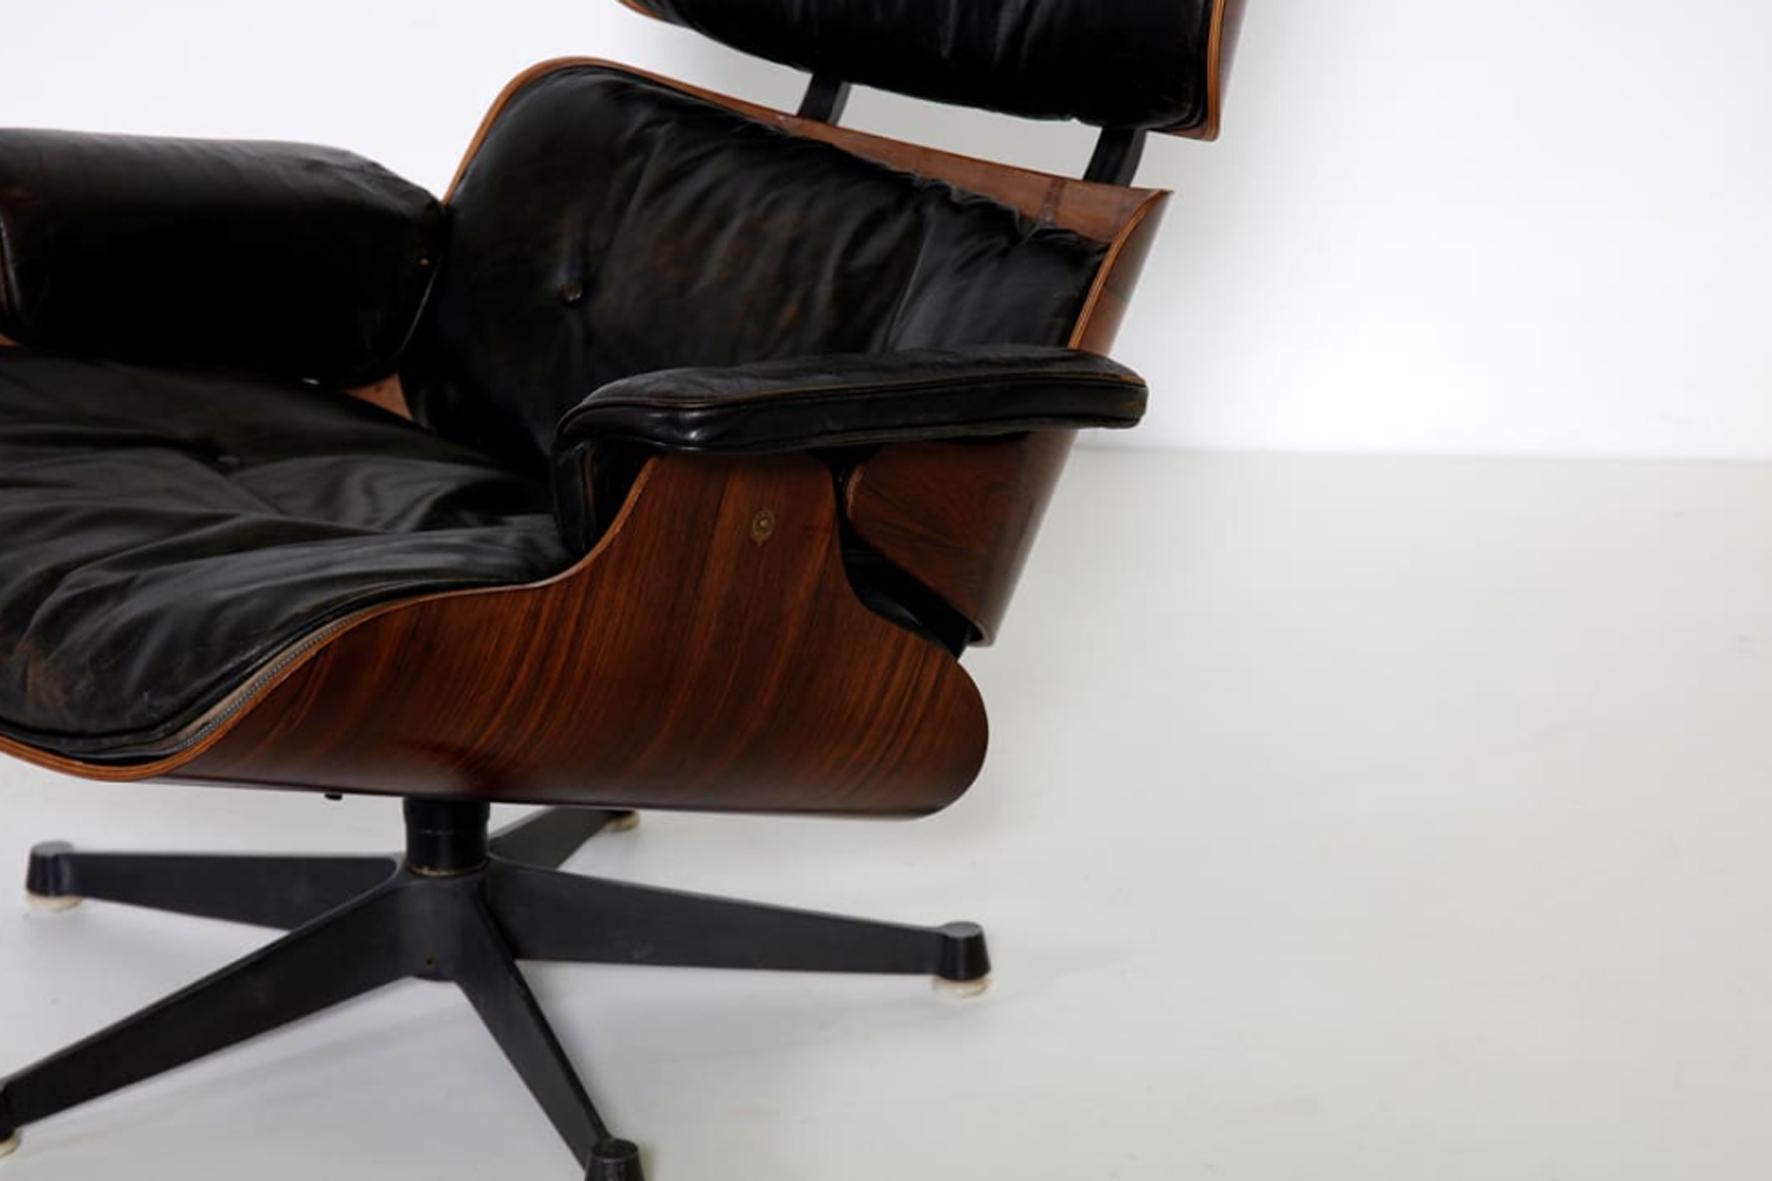 Iconic lounge chair with footrest designed by Charles and Ray Eames for Herman Miller production (1956).
The lounge chair and the footrest have a rosewood structure with the aluminium base covered in black leather. 
A swivel armchair, with a